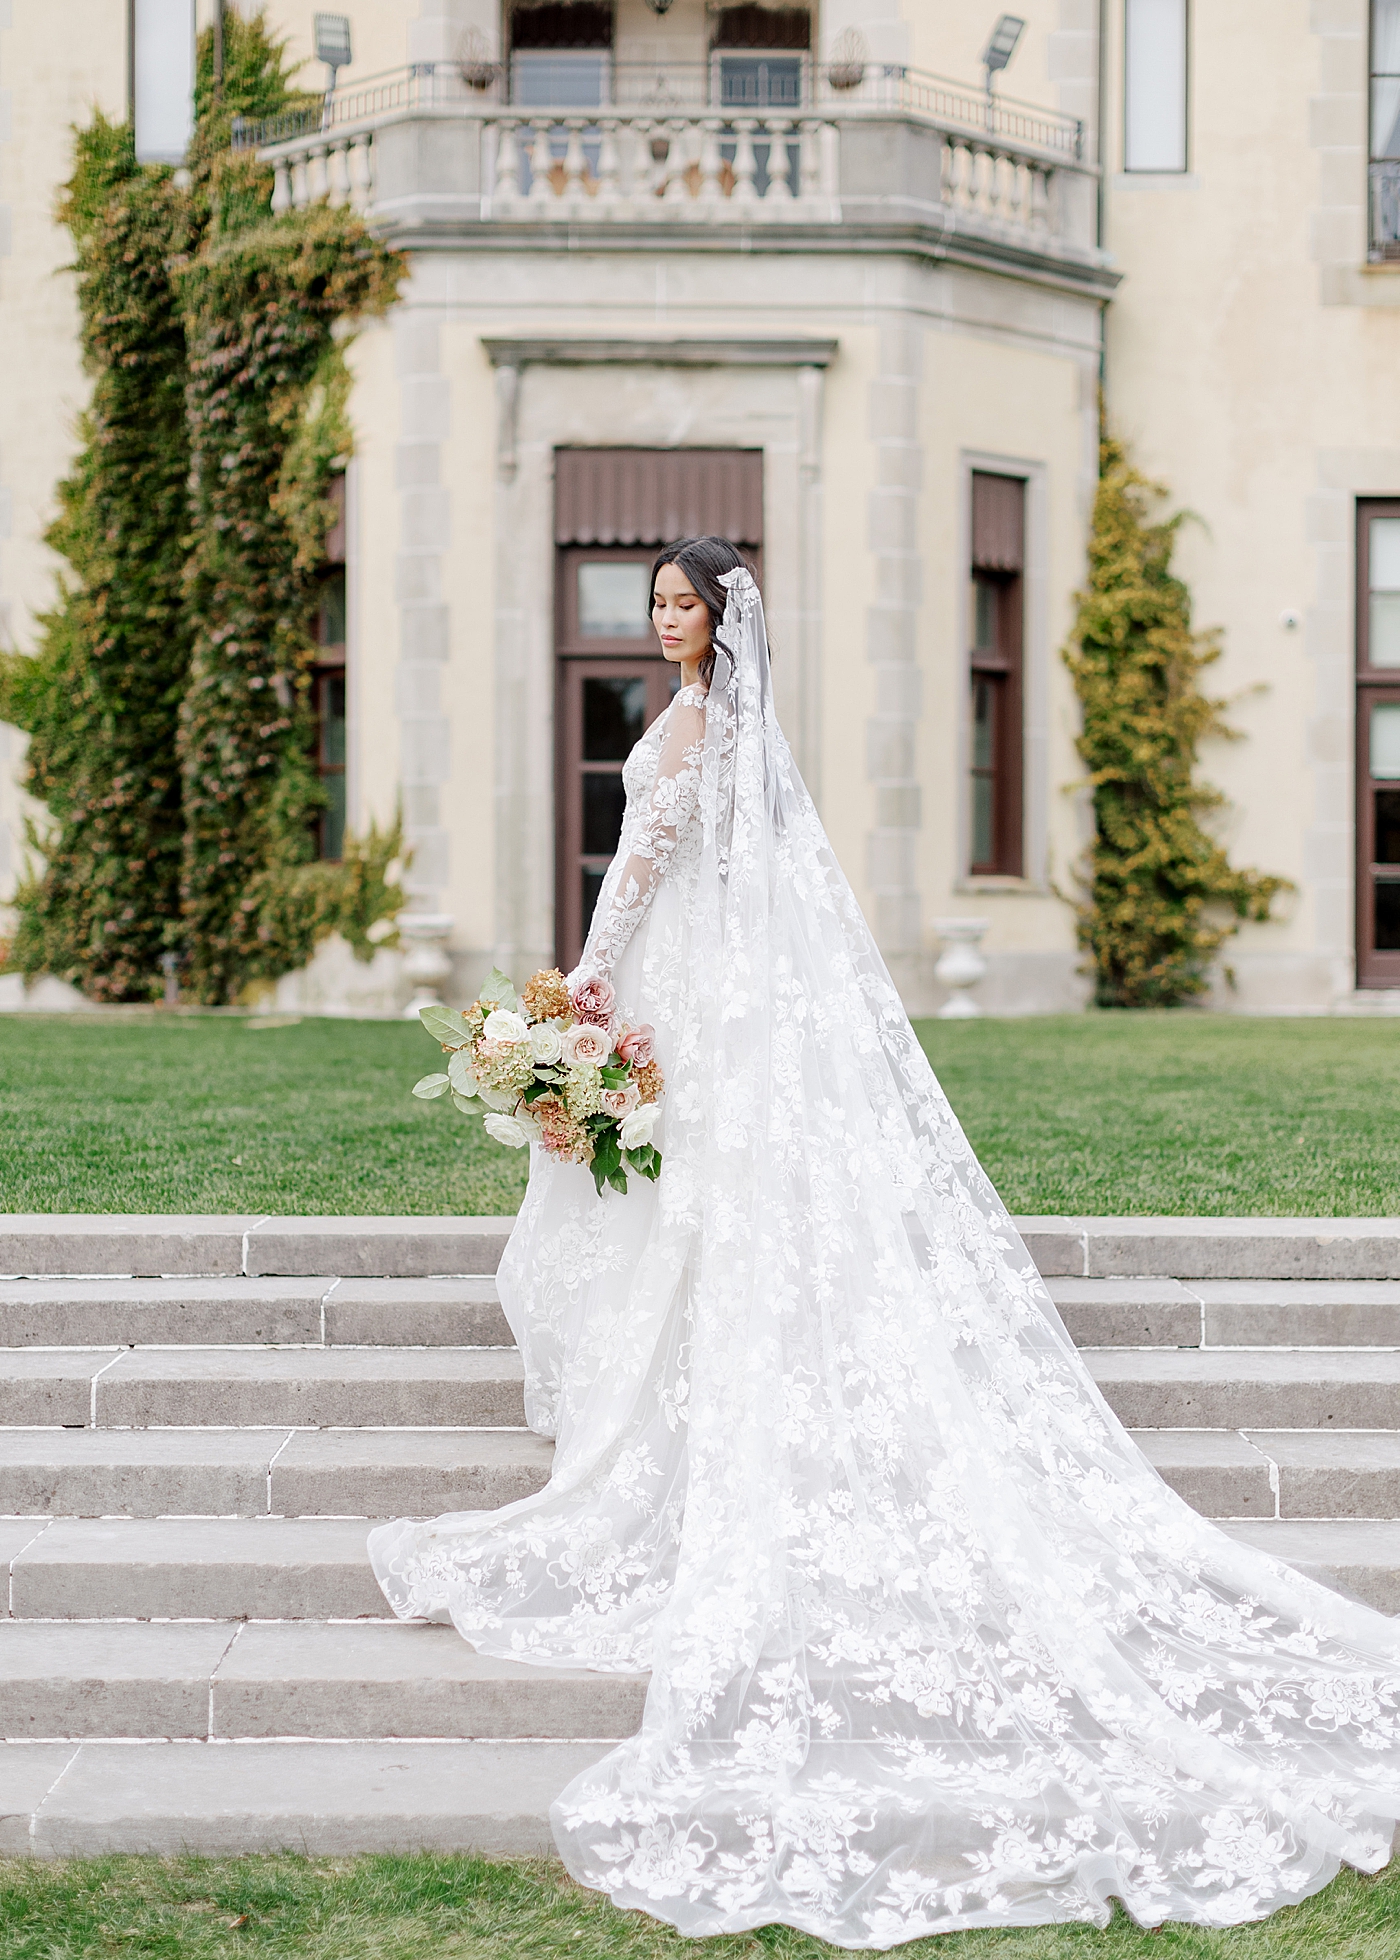 Bride with veil and bridal bouquet in front of a grand entrance during Oheka castle wedding | Image by Hope Helmuth Photography